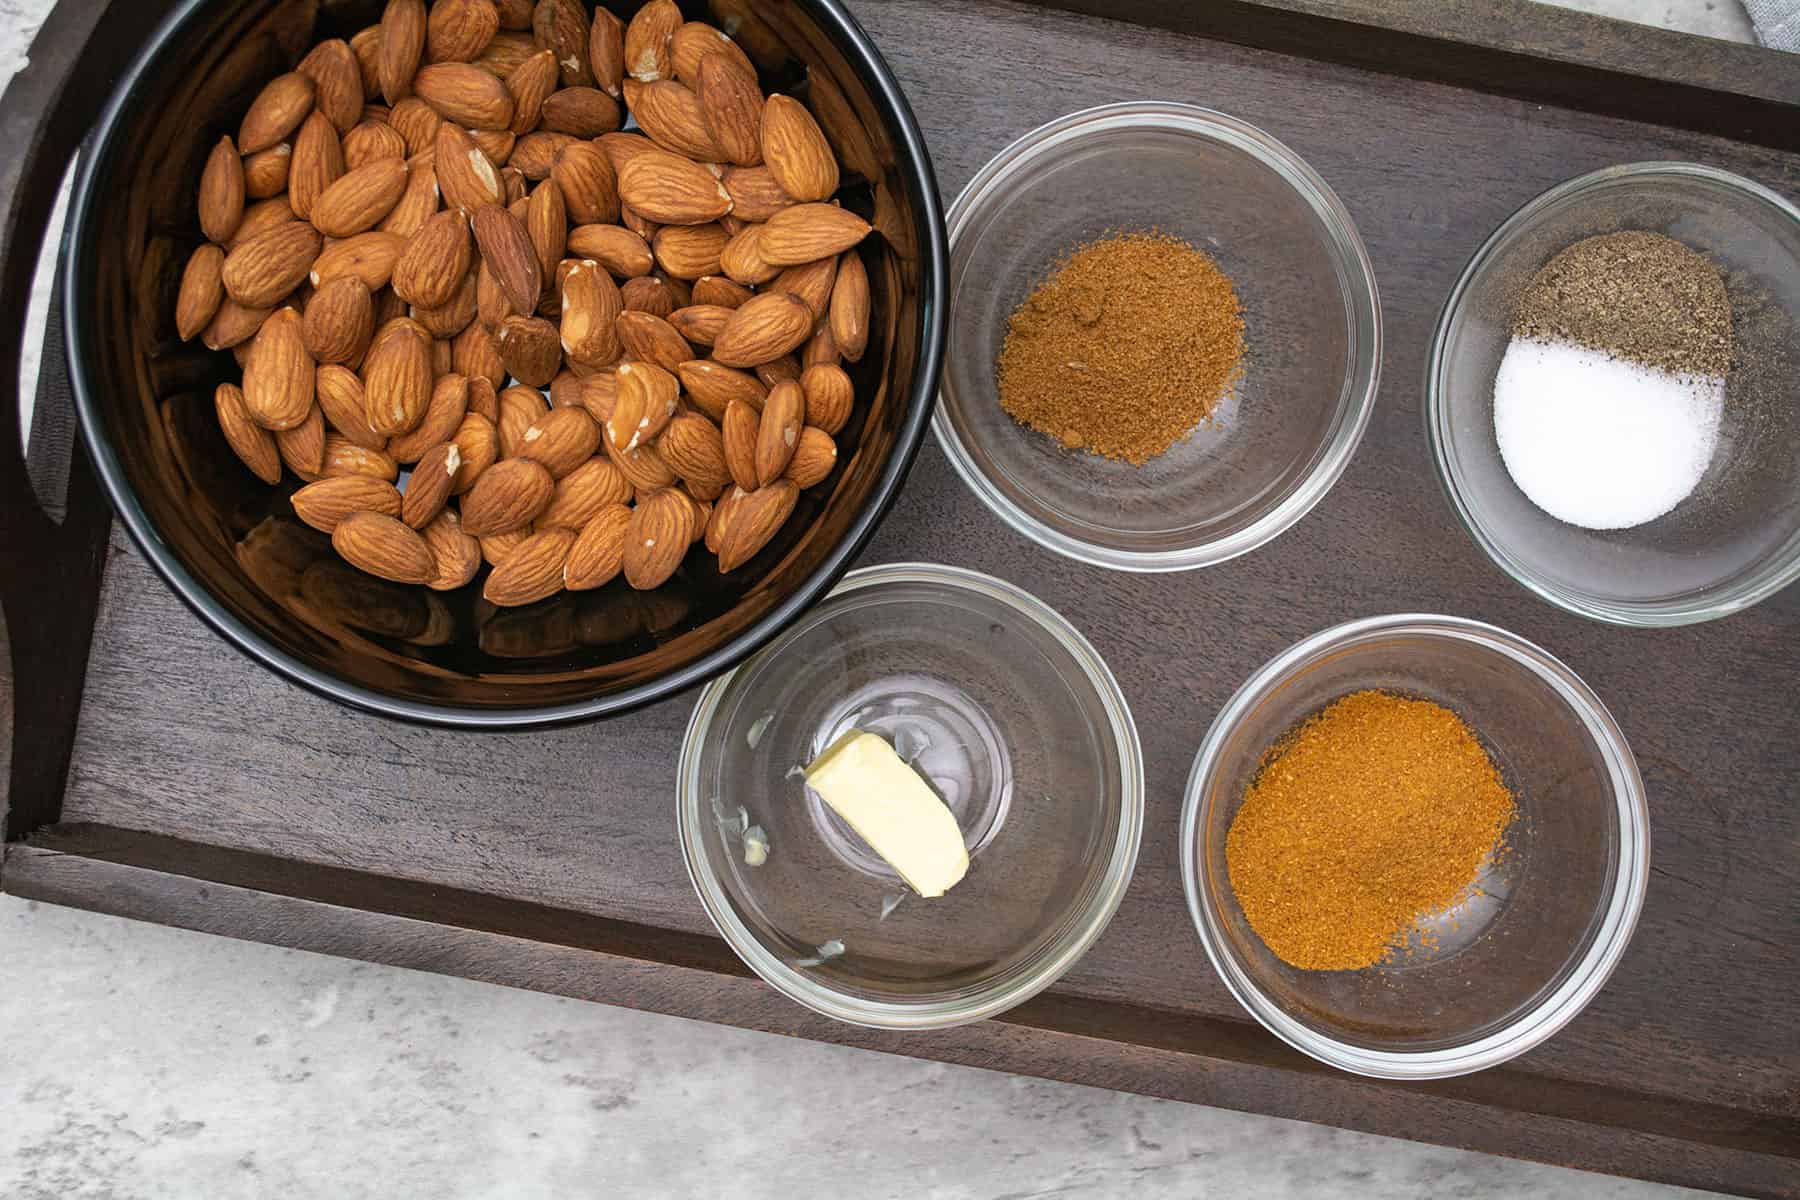 ingredients assembled in a tray for making curried almonds